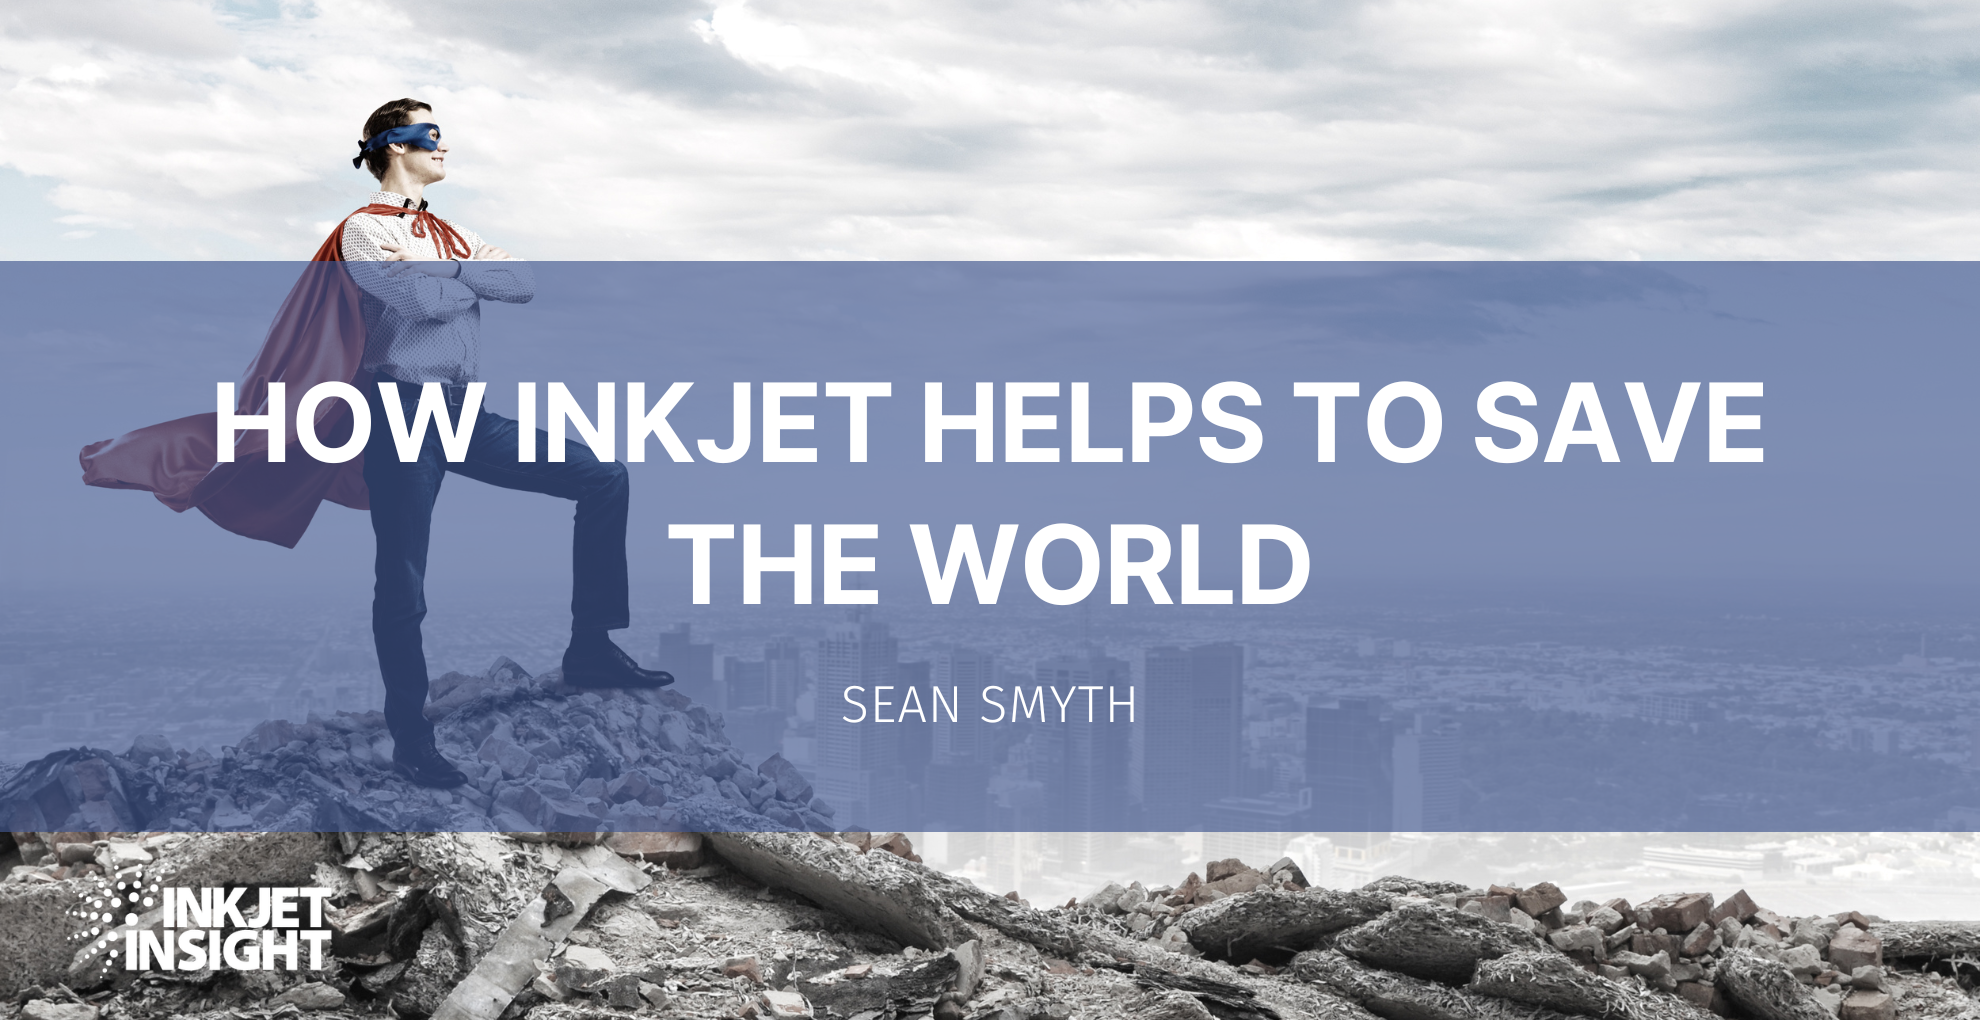 Featured image for “How Inkjet Helps to Save the World”